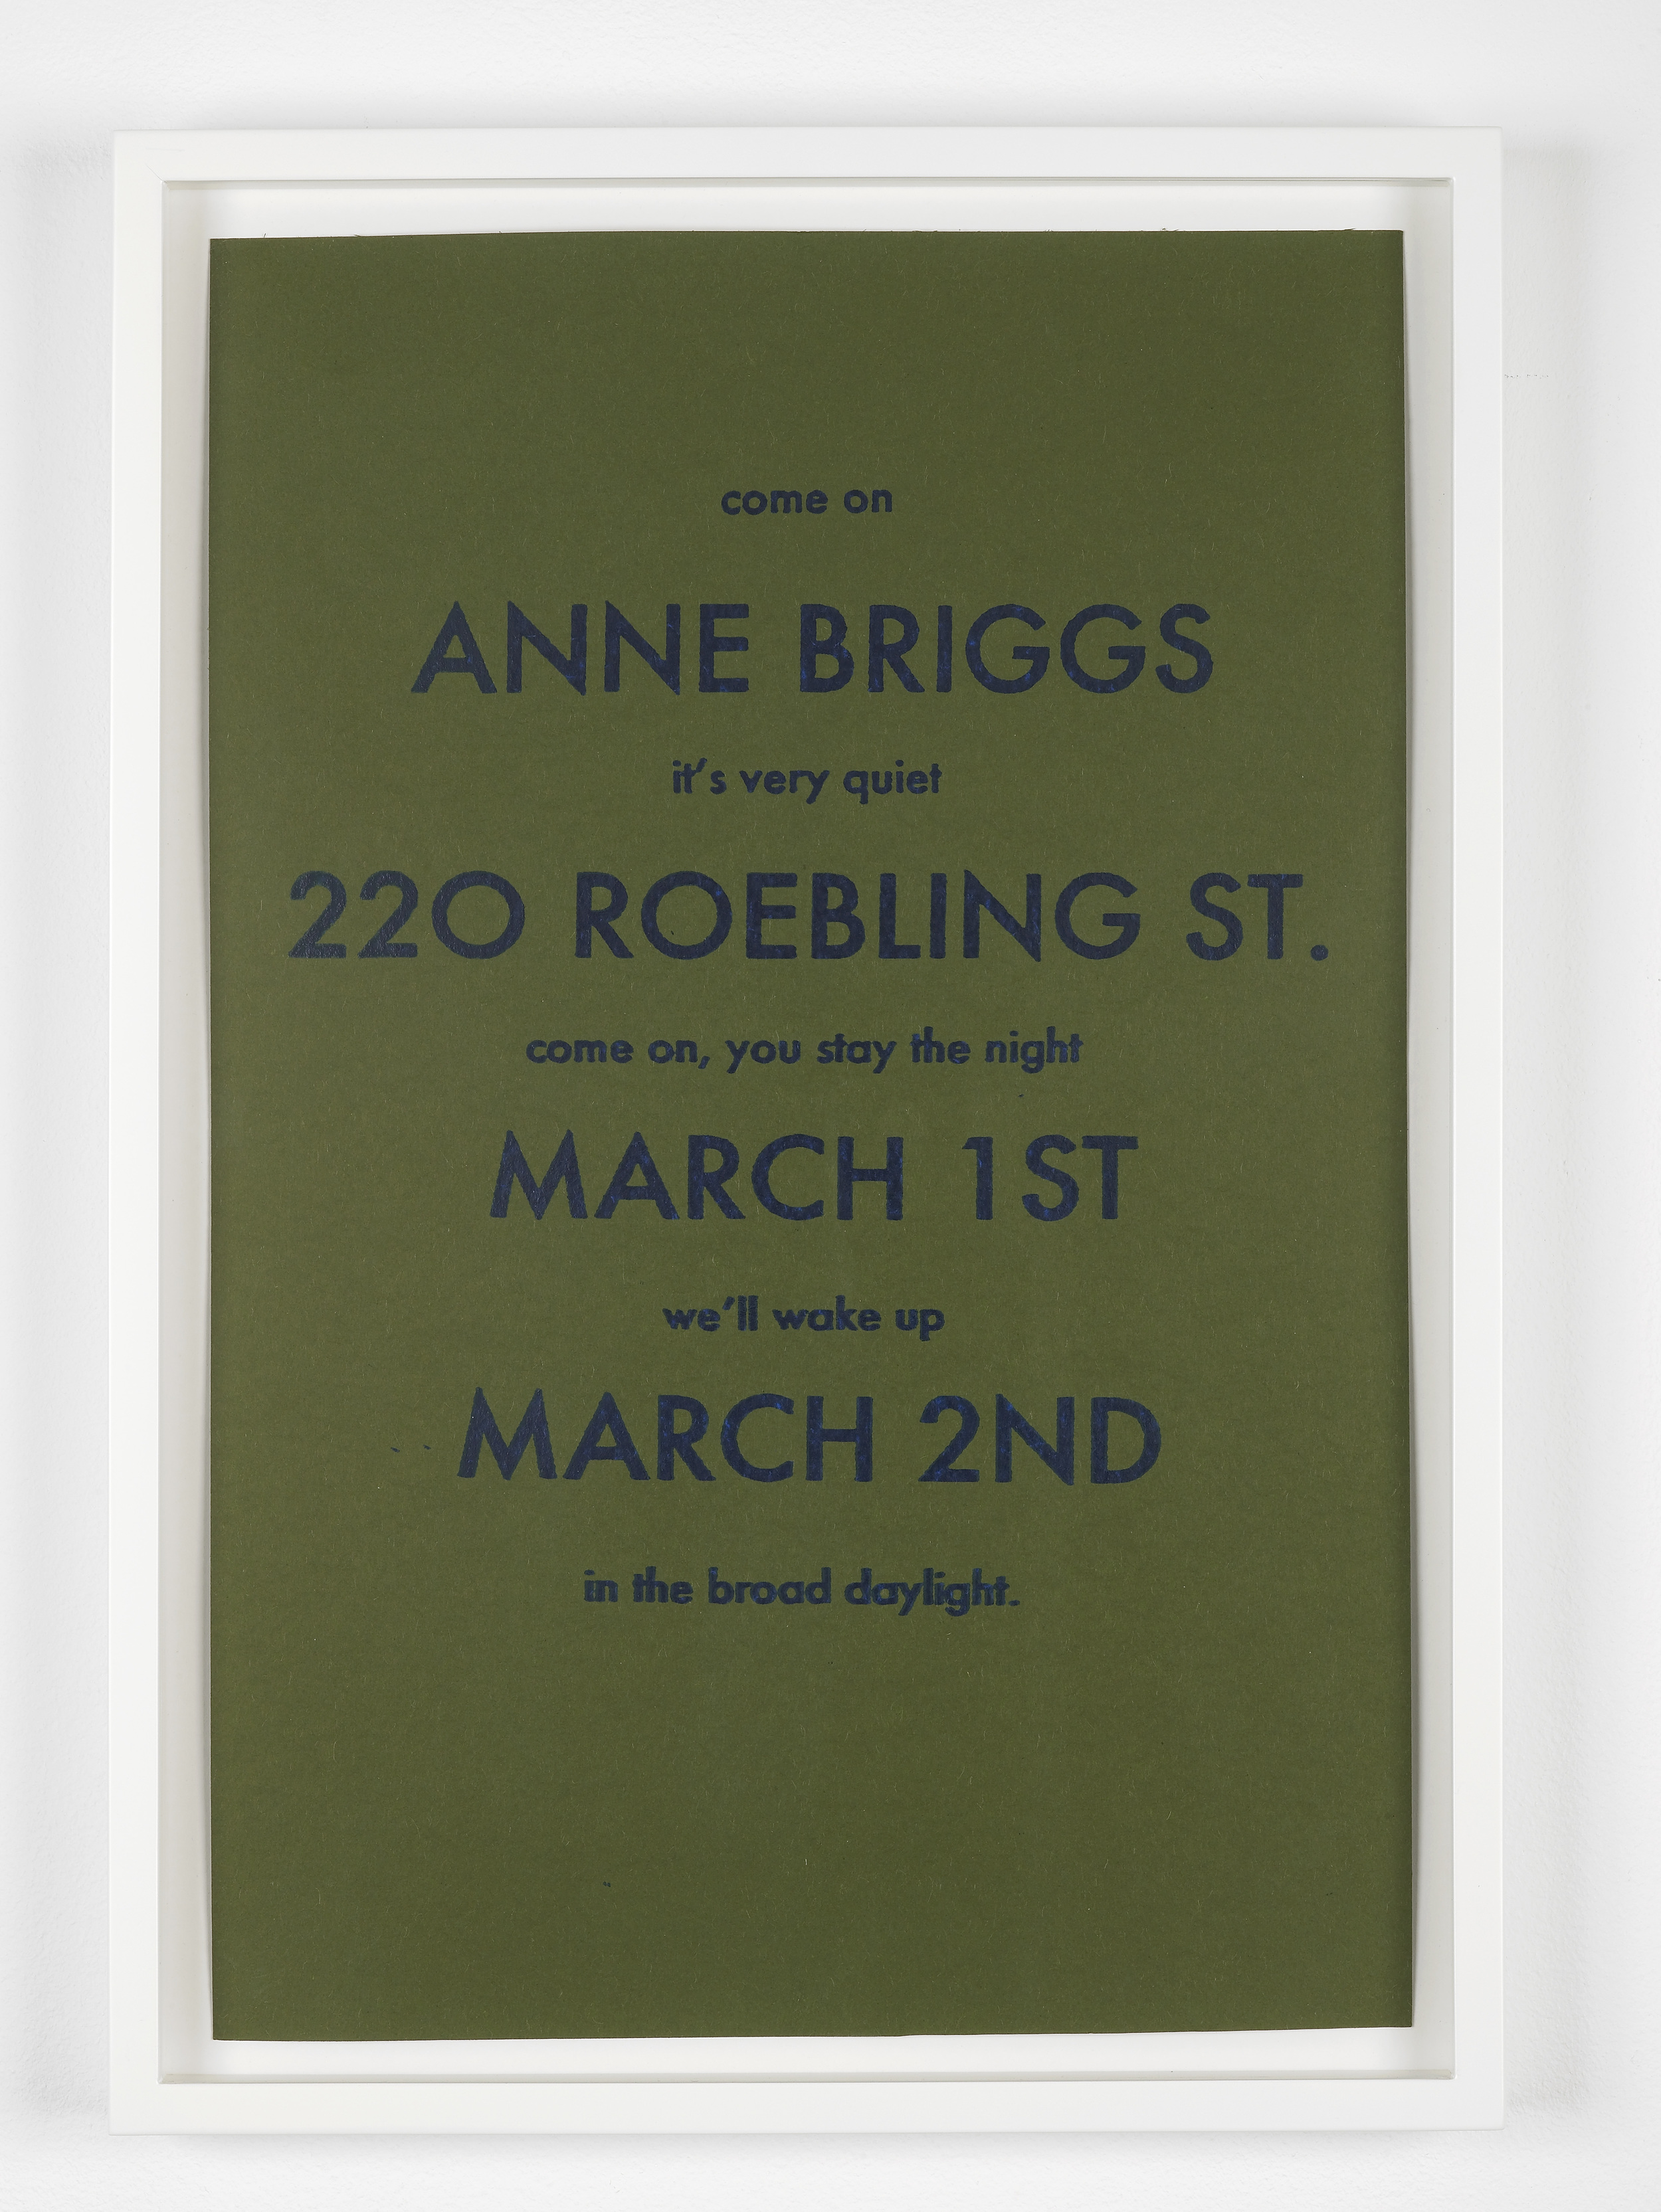     Marc Hundley Anne Briggs 220 Roebling St. March 1st &amp; March 2nd&nbsp; 2012 Ink on paper 45.7 x 30.5 cm / 18 x 12 in 